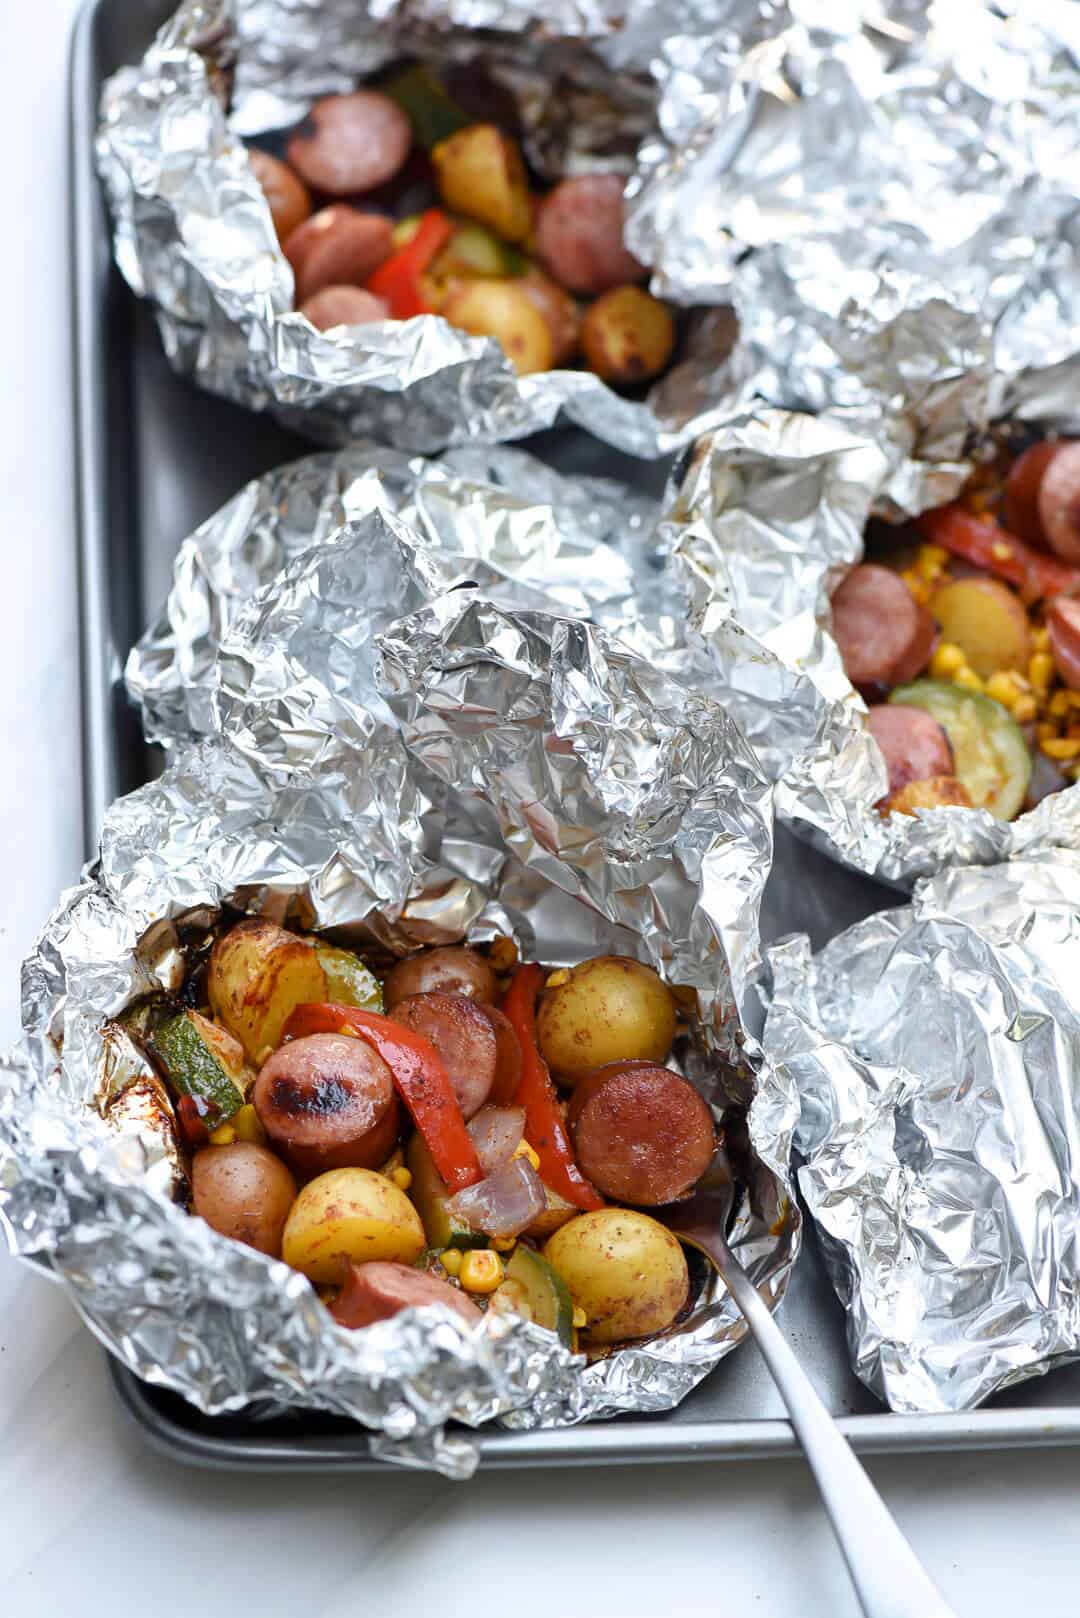 A close up shot of an open foil pack filled with grilled sausage, potatoes, and vegetables.